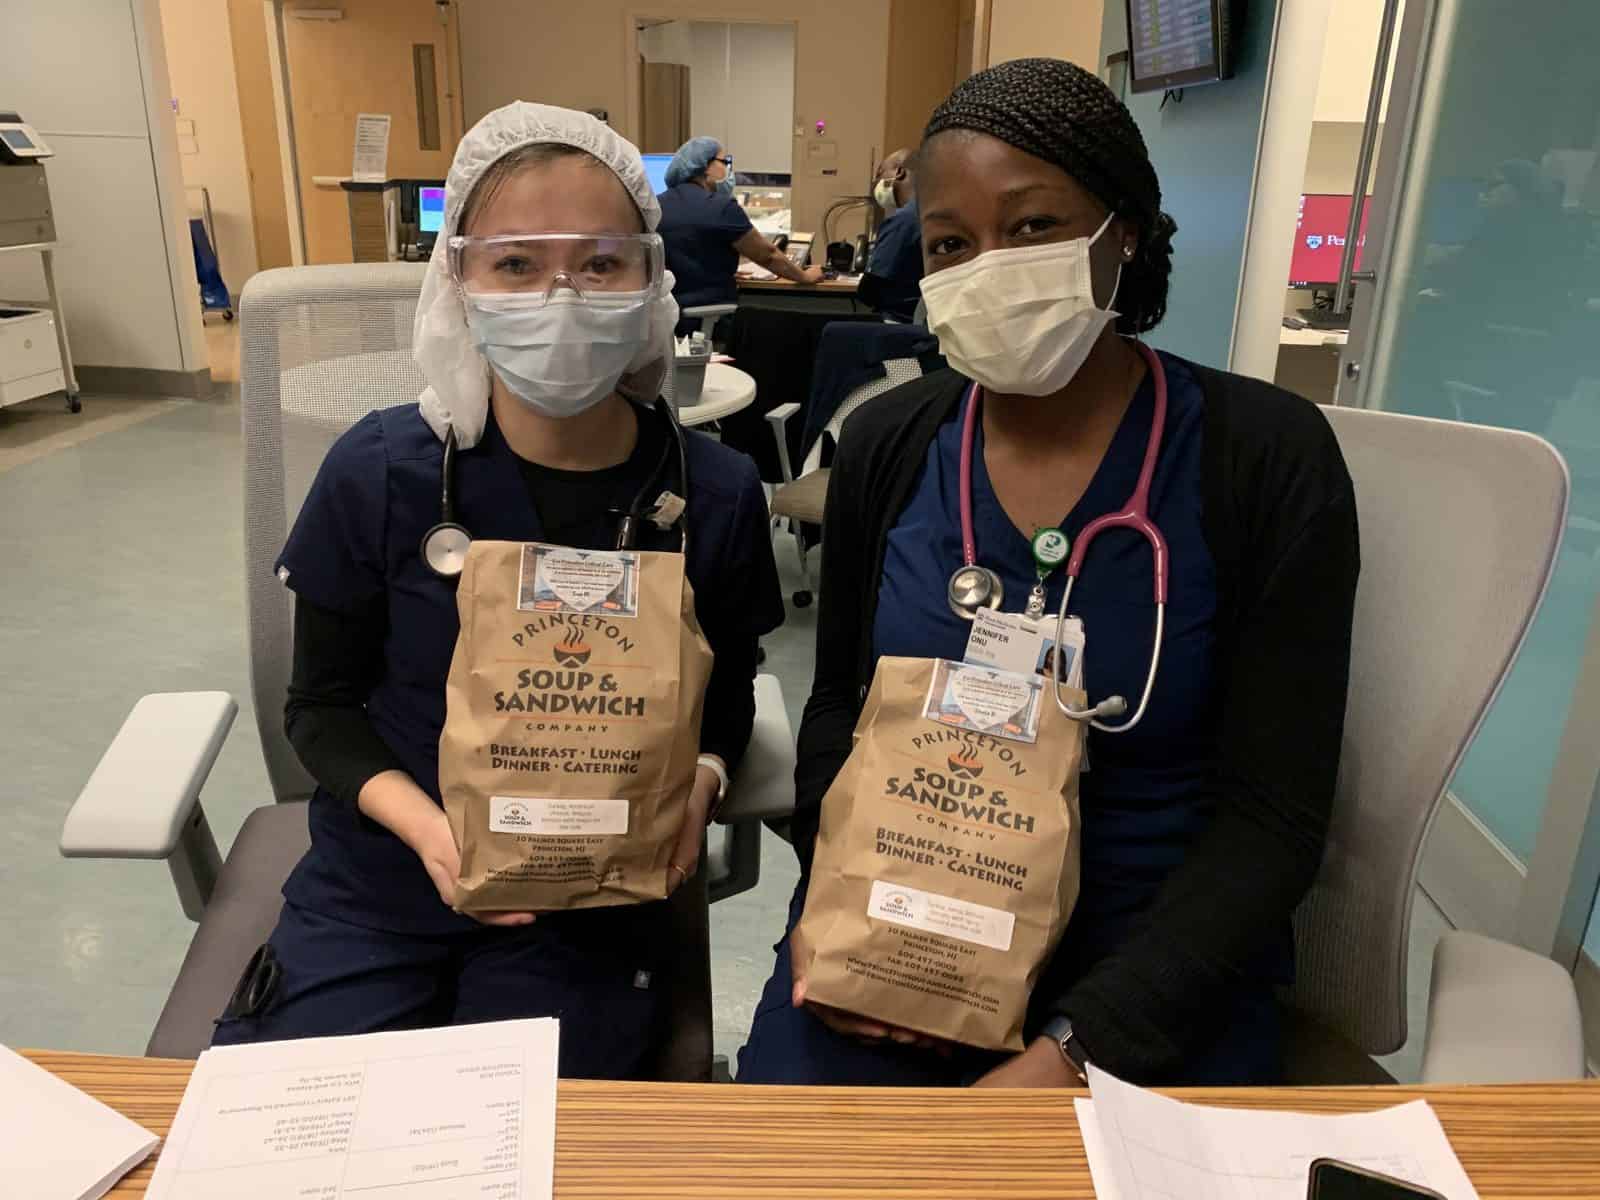 Princeton Soup & Sandwich Company serves up meals for healthcare workers and first responders with support from the community